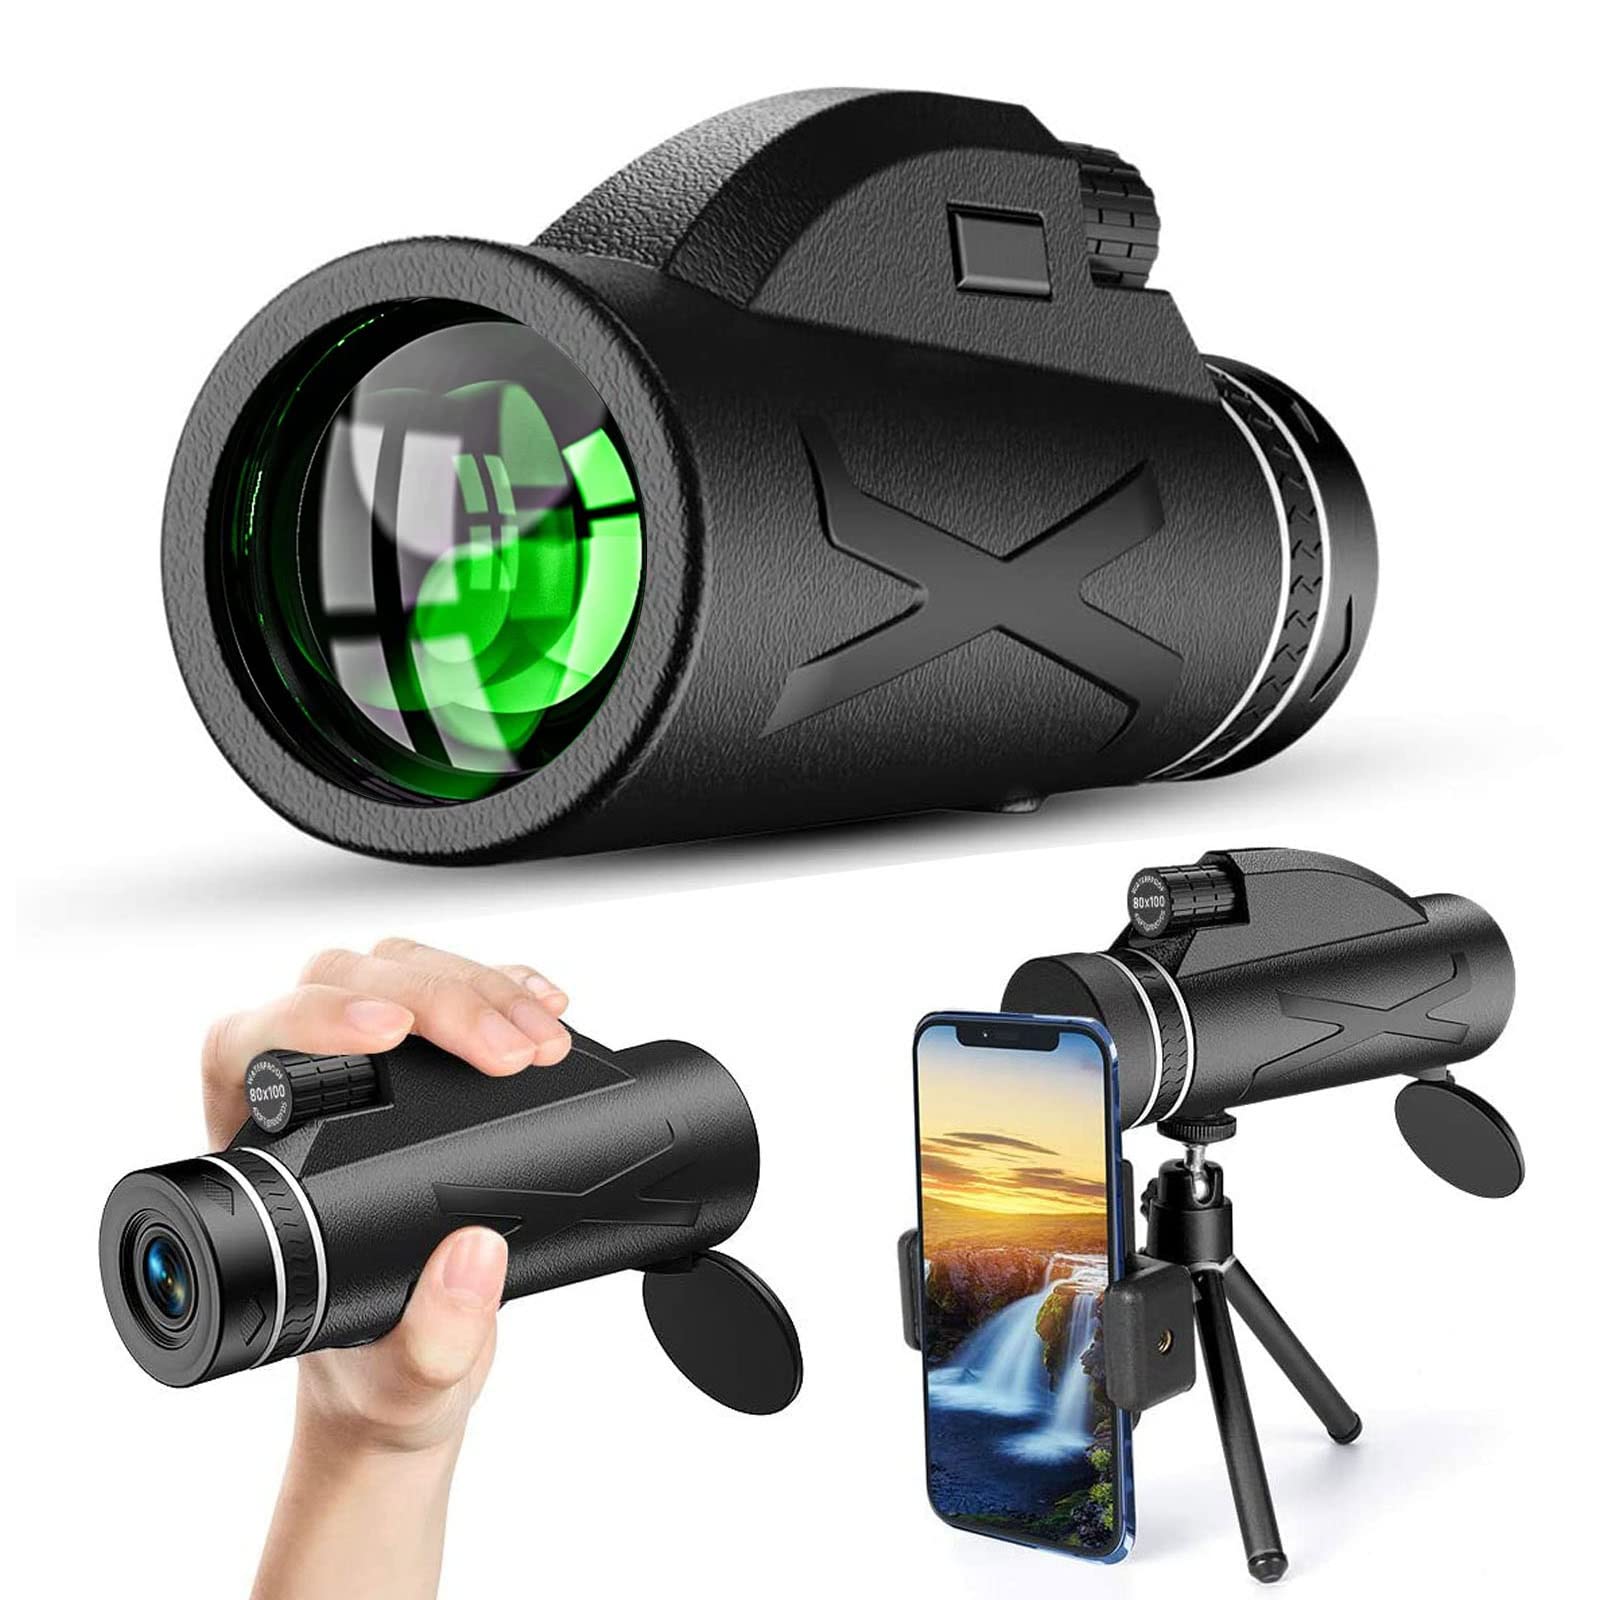 Monocular Telescope - 80x100 Compact High Power Monocular for Adults Kids HD Bifocal with Smartphone Holder and Tripod, Waterproof Fogproof Portable Prism for Wildlife Bird Watching Hunting Camping